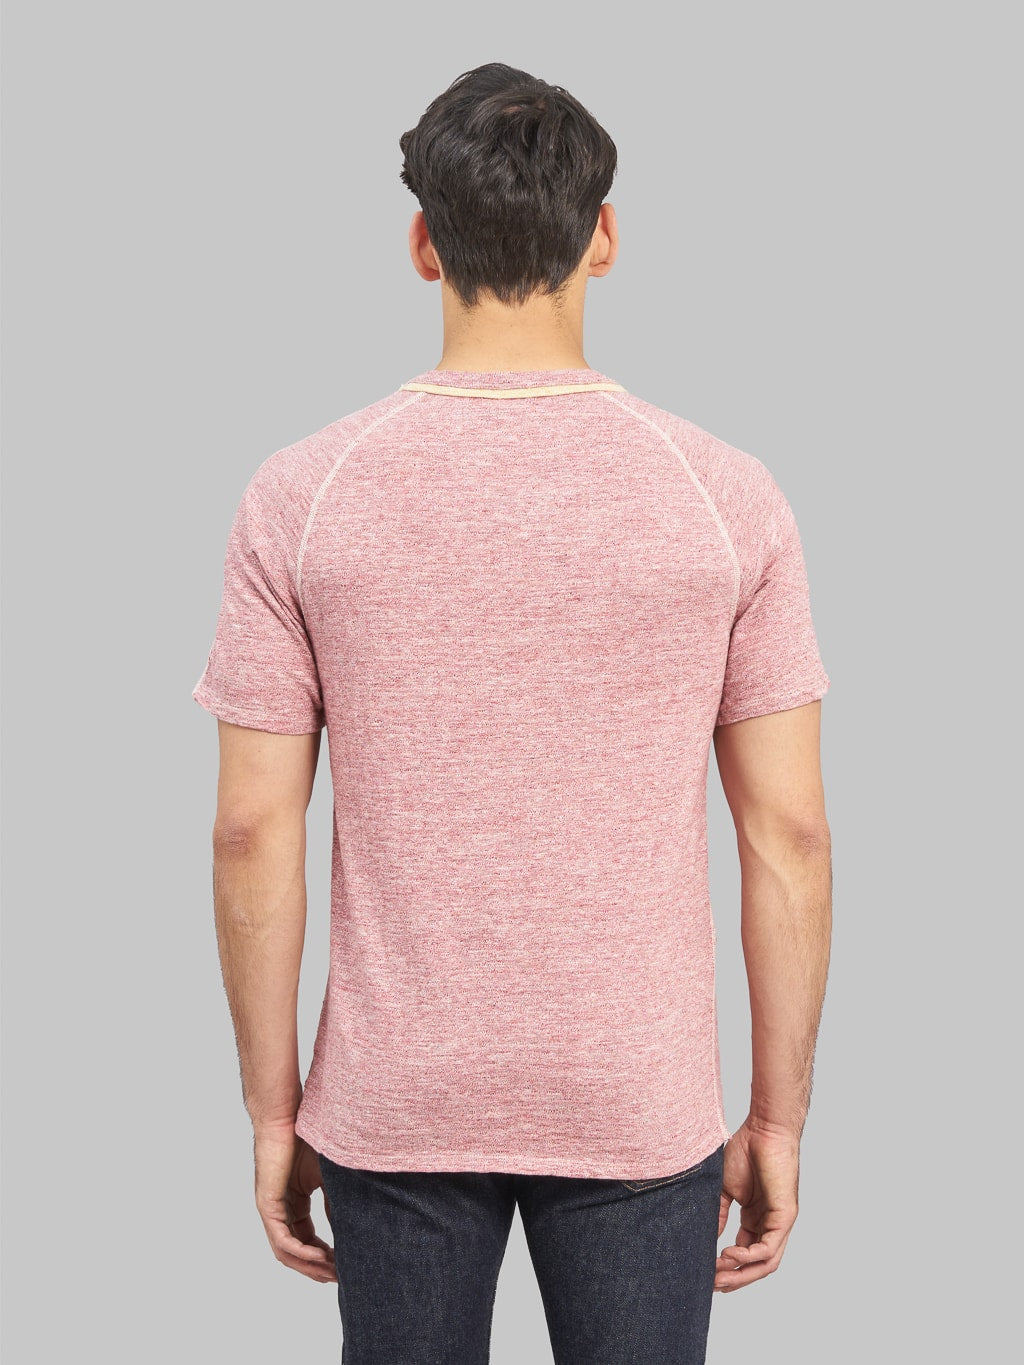 loop and weft double binder neck heather tshirt cherry back fit